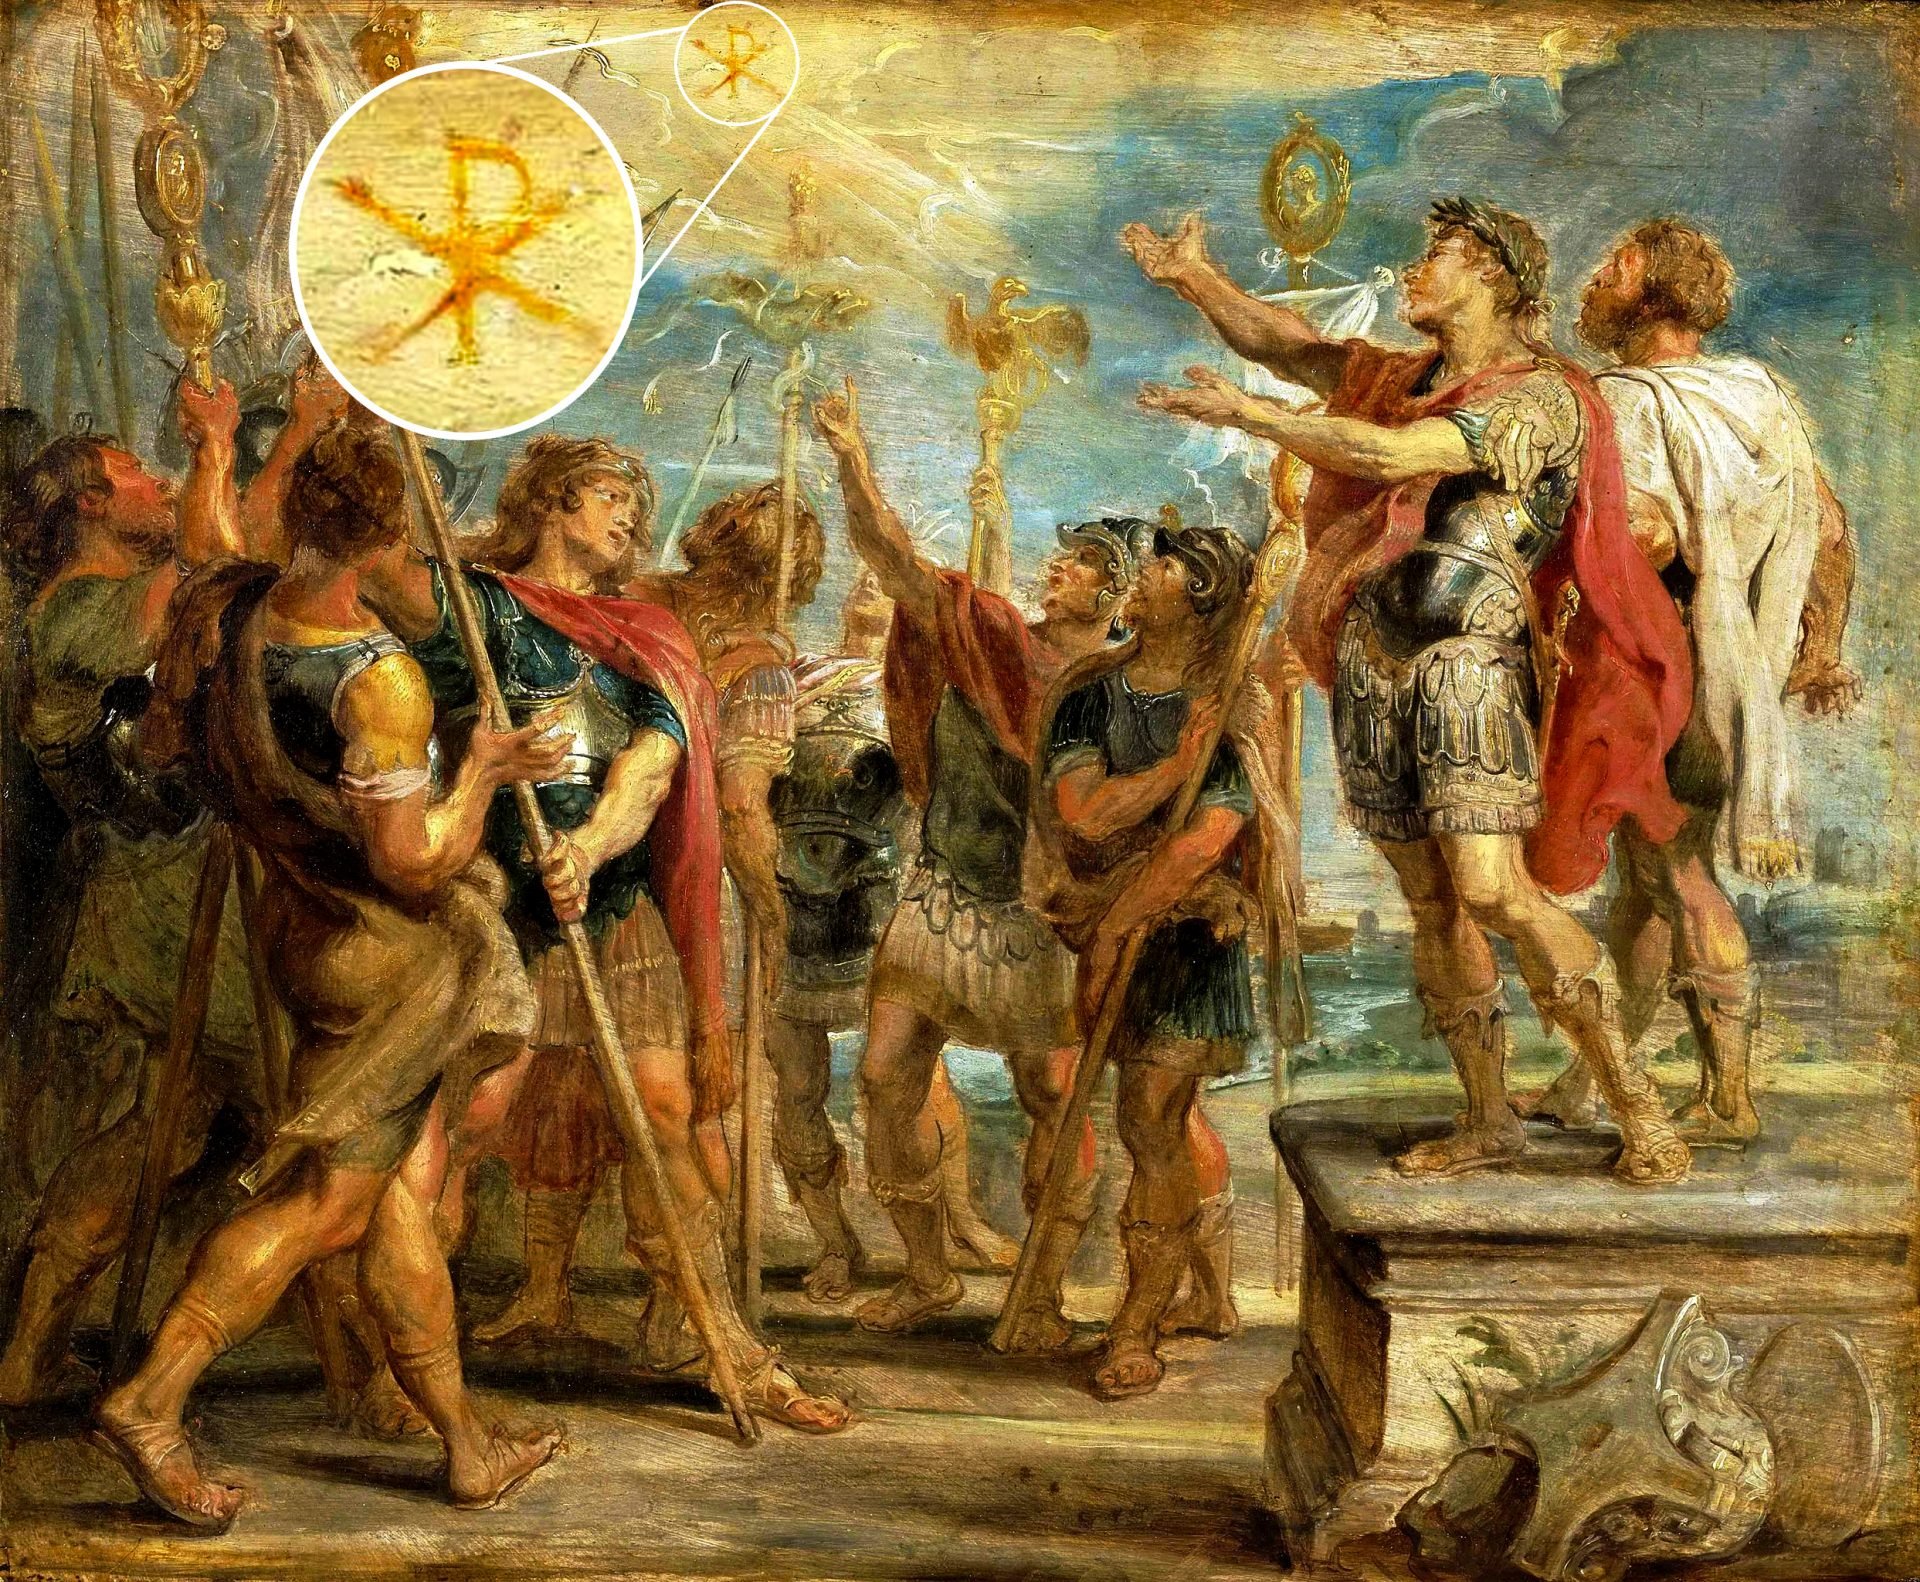 This preparatory sketch depicts a pivotal moment in 312 CE where Emperor Constantine the Great envisions a Chi Rho symbol in the sky and hears a voice proclaiming, 'By this sign, you shall conquer.' Following the vision, Constantine replaced the traditional Roman eagle on his army's emblem with a Chi Rho symbol, leading to a decisive victory that facilitated the spread of Christianity in the Roman Empire. While this sketch was intended for a tapestry series on Constantine's life, it was ultimately not used.